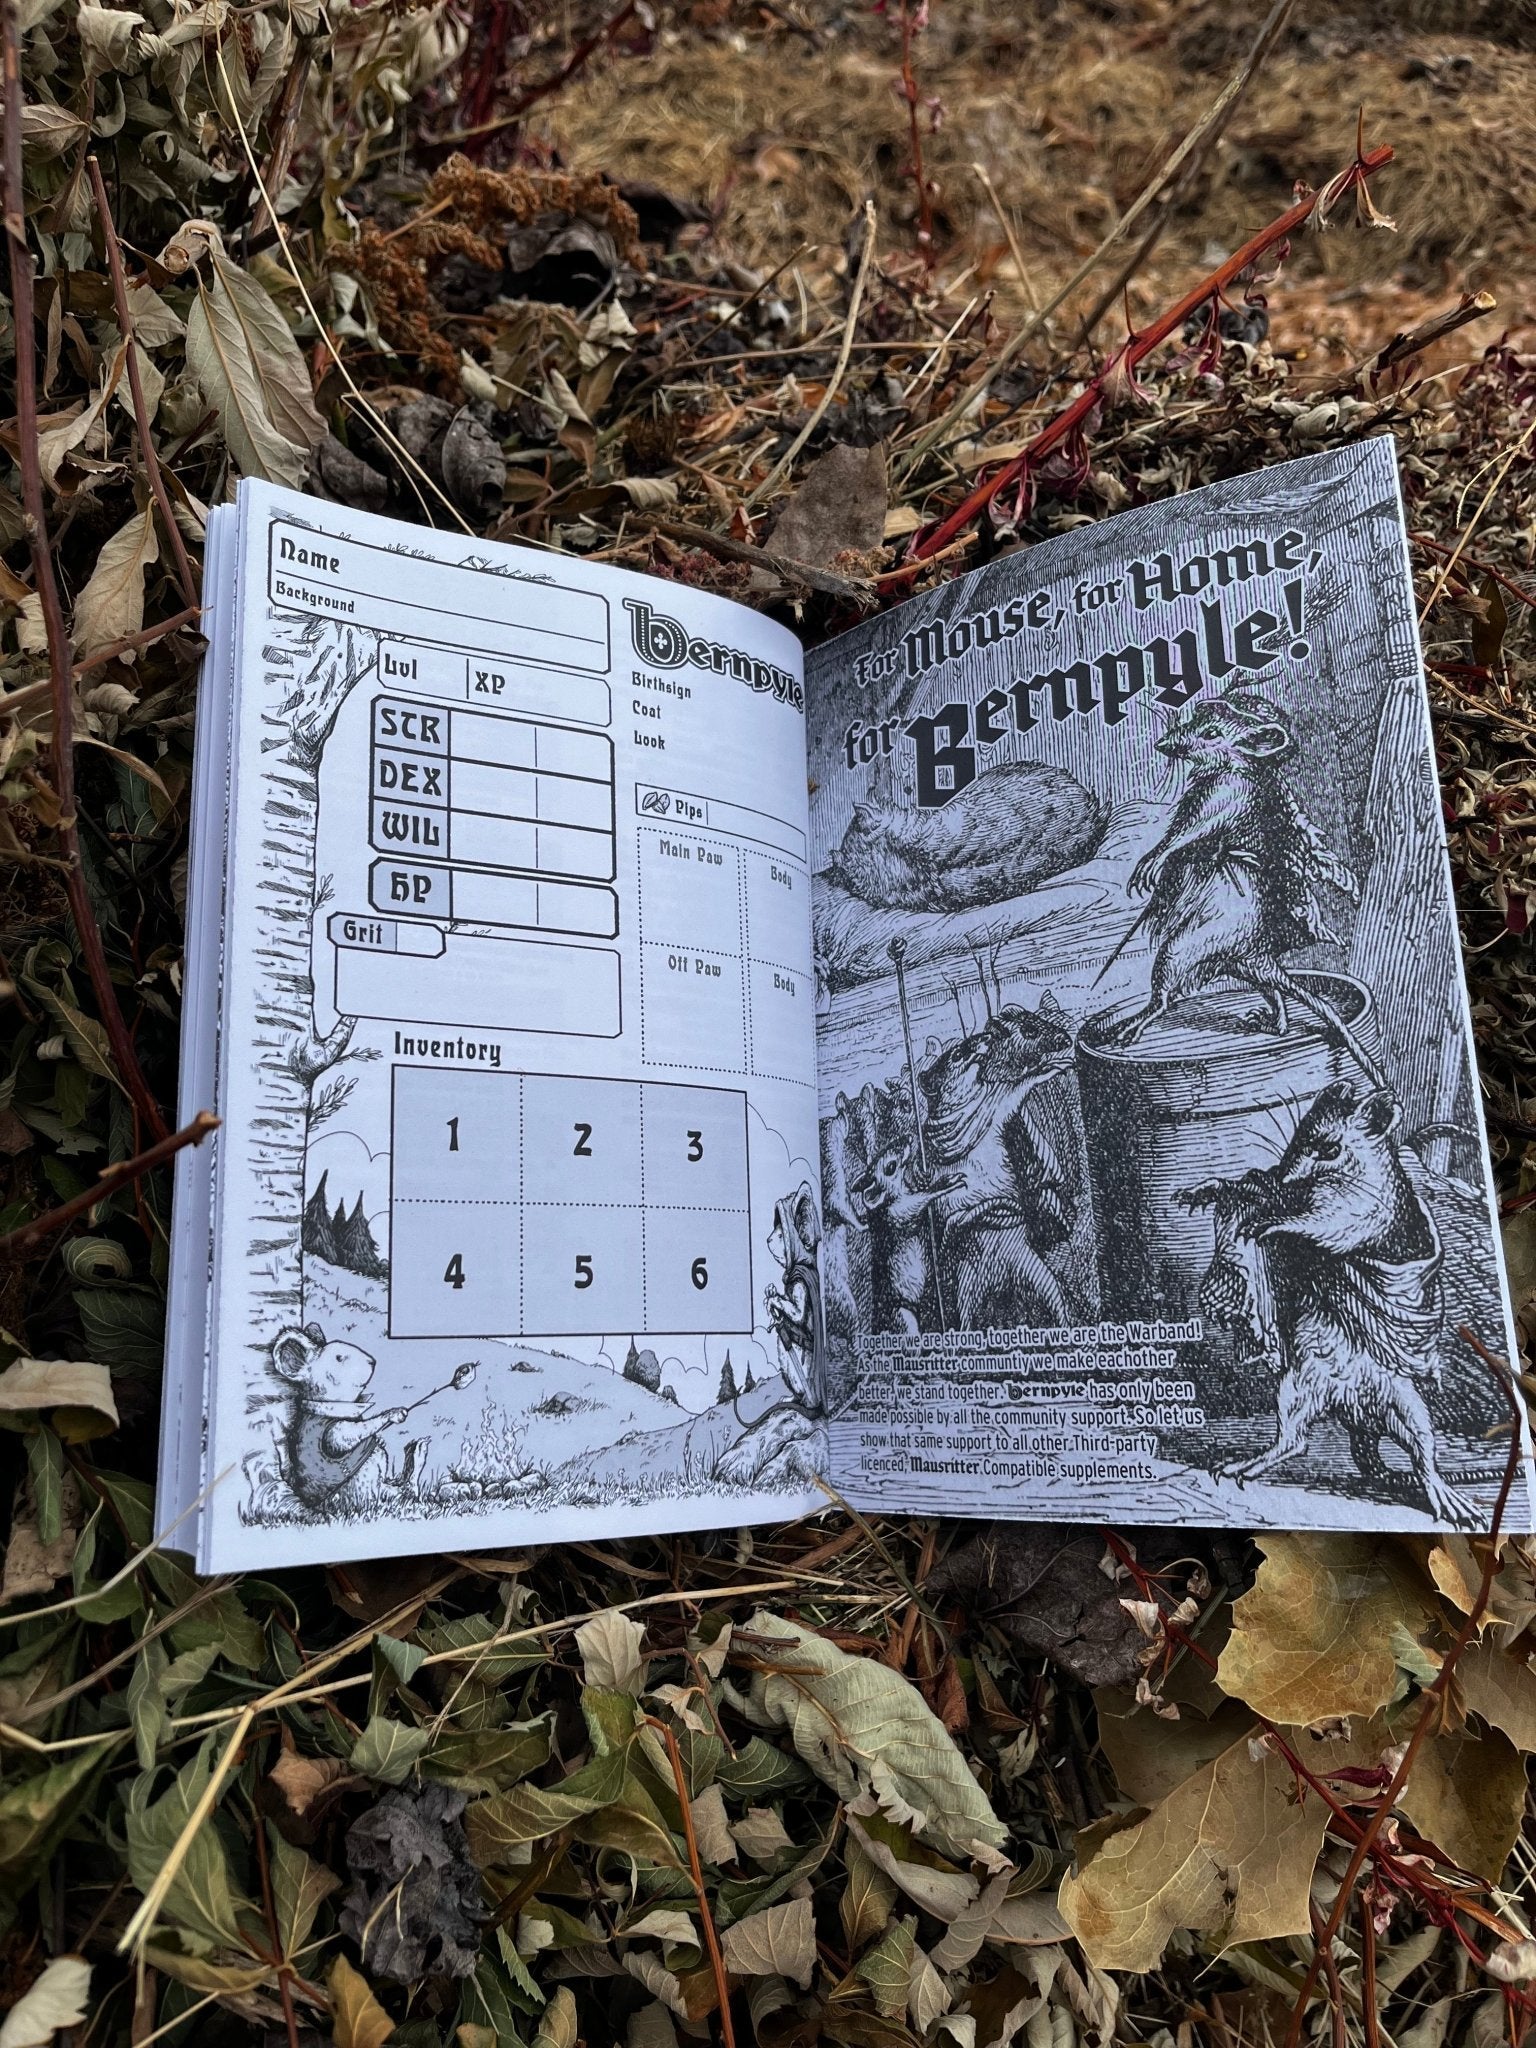 Bernpyle YEAR ONE + PDF - Exalted Funeral